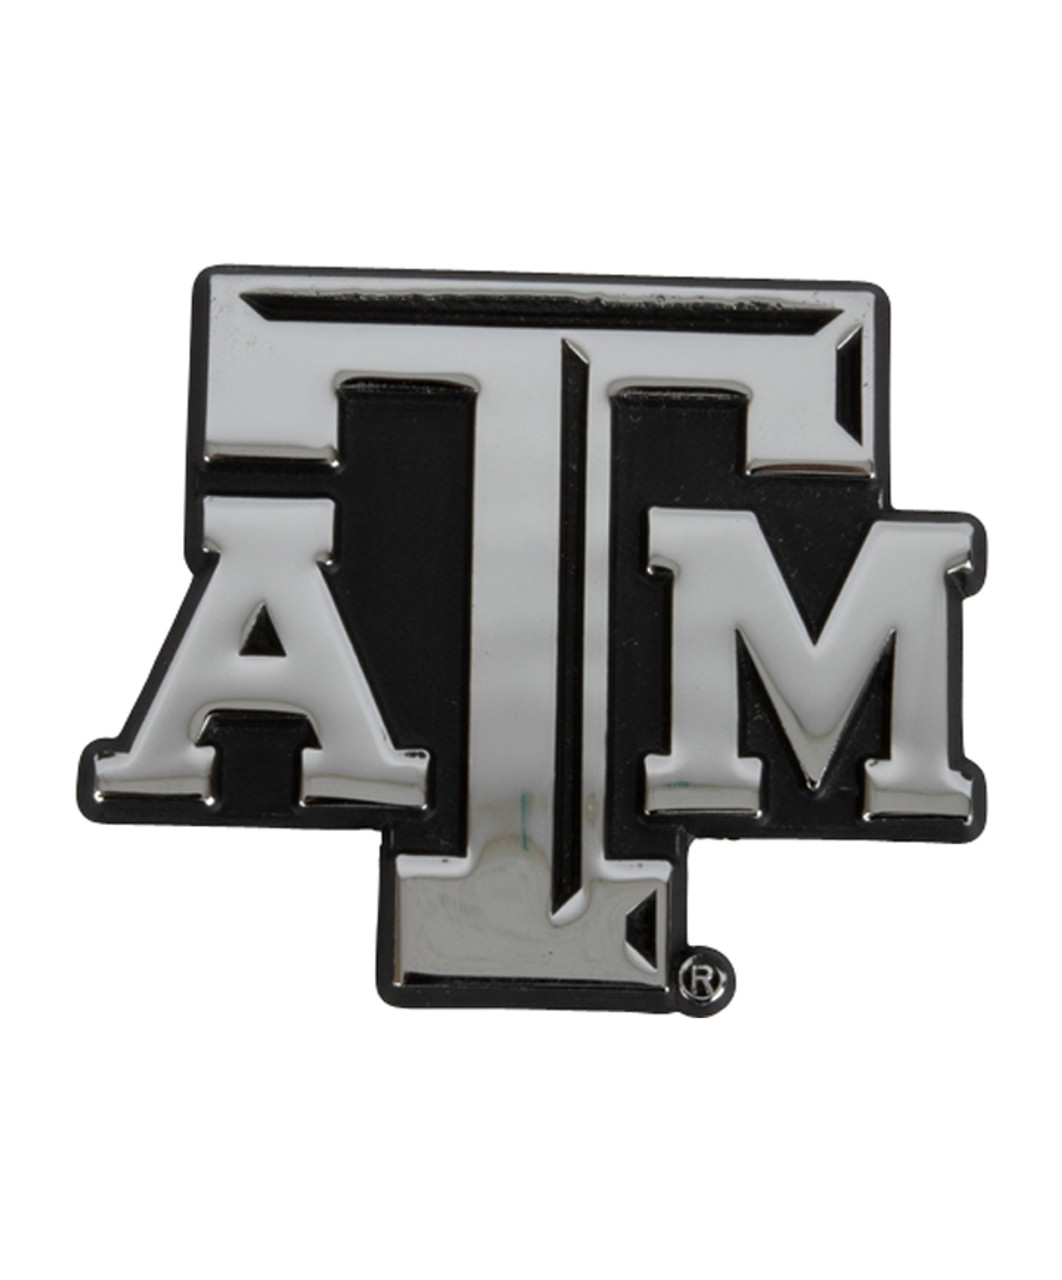 Texas A&M Aggies Wooden Lonestar Key Chain - The Warehouse at C.C. Creations